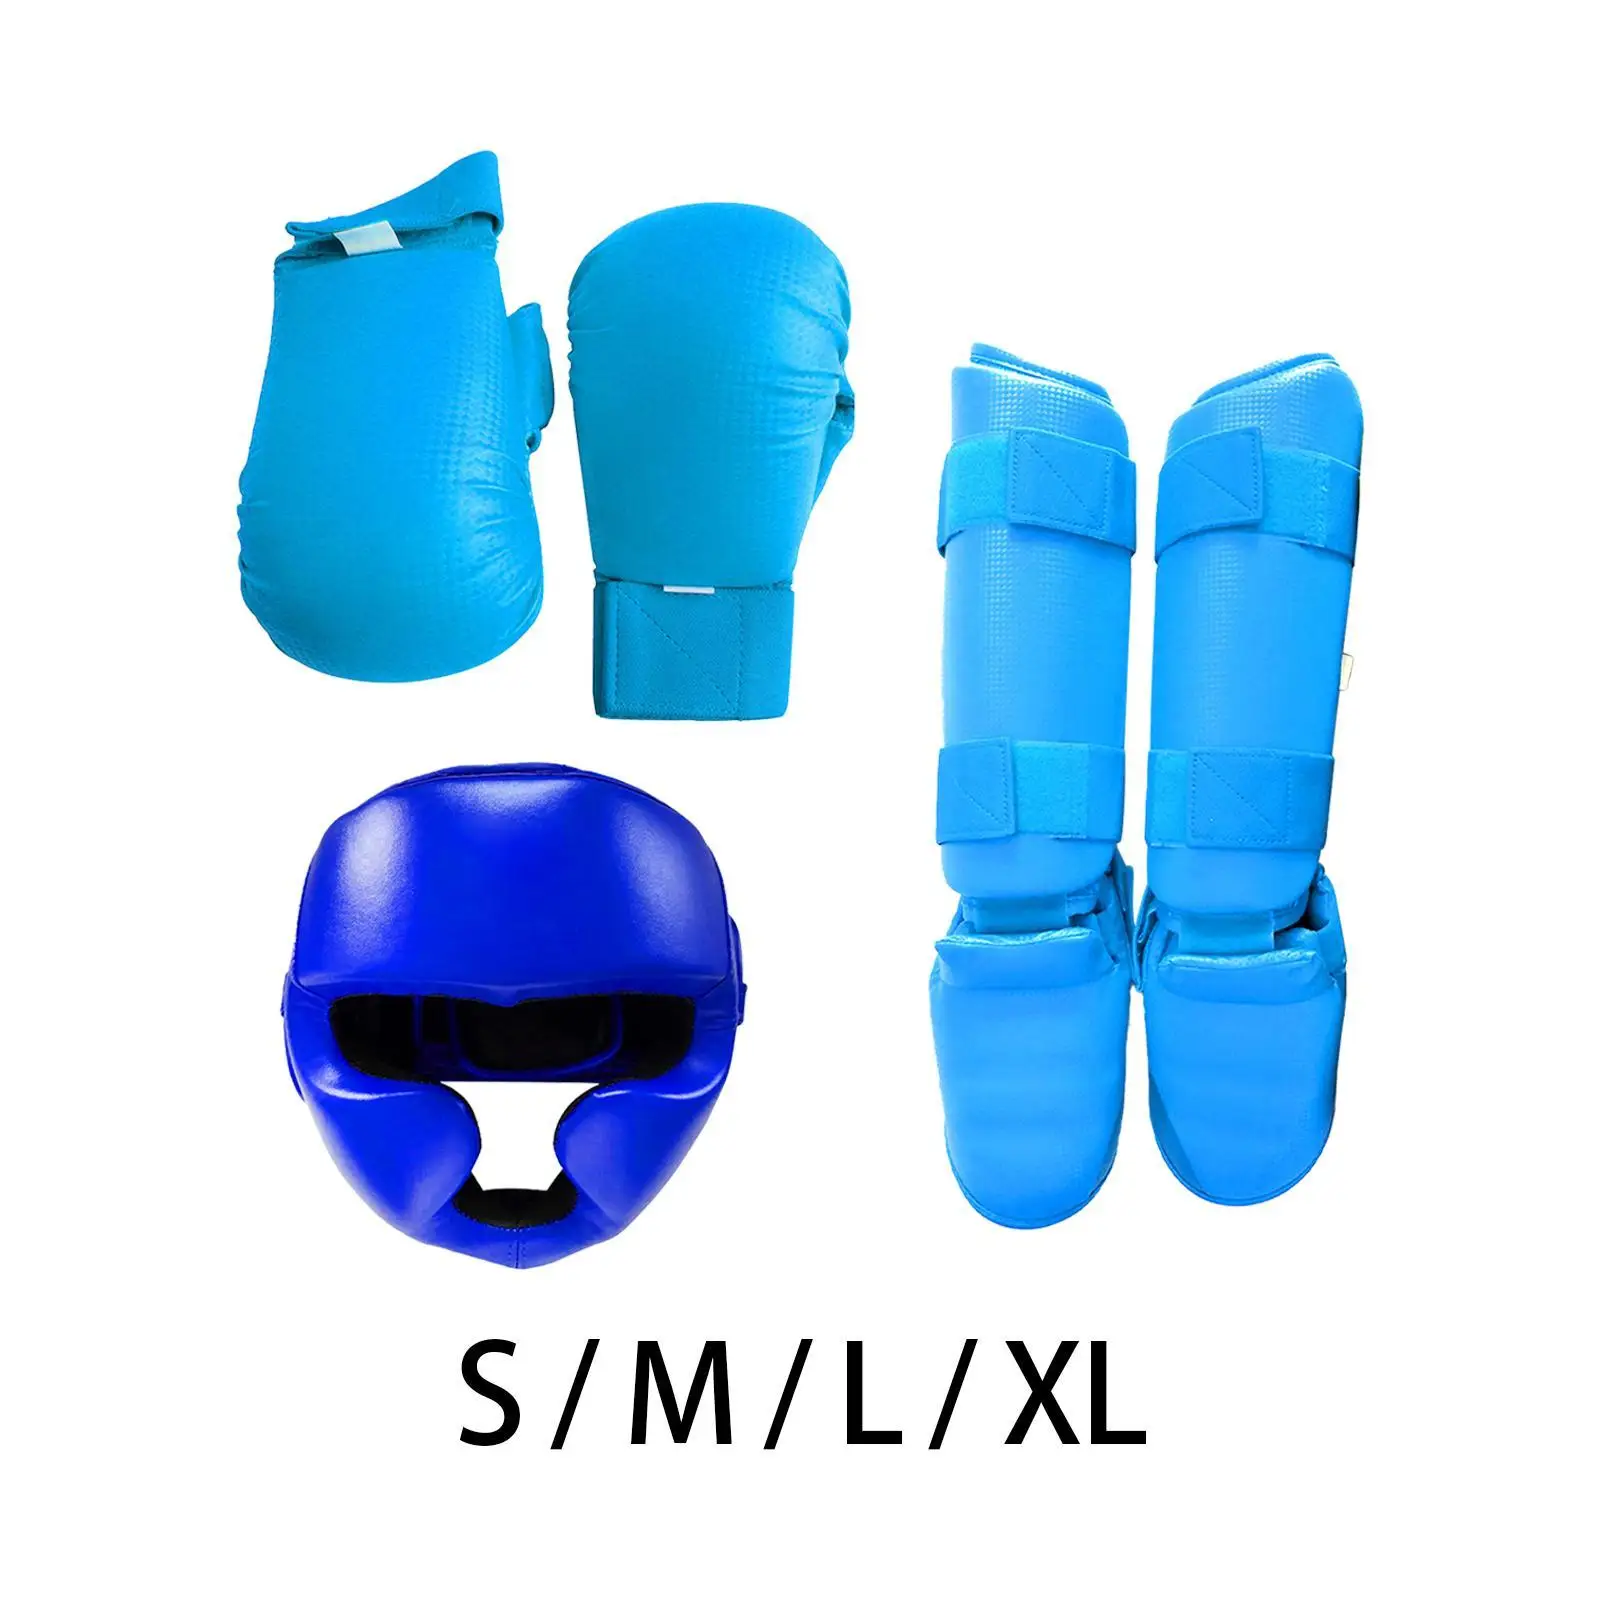 

Karate Sparring Gear Set Exercise Training Boxing Head Gear with Shin Guards Gloves for Sparring Kickboxing Taekwondo Mma Sanda